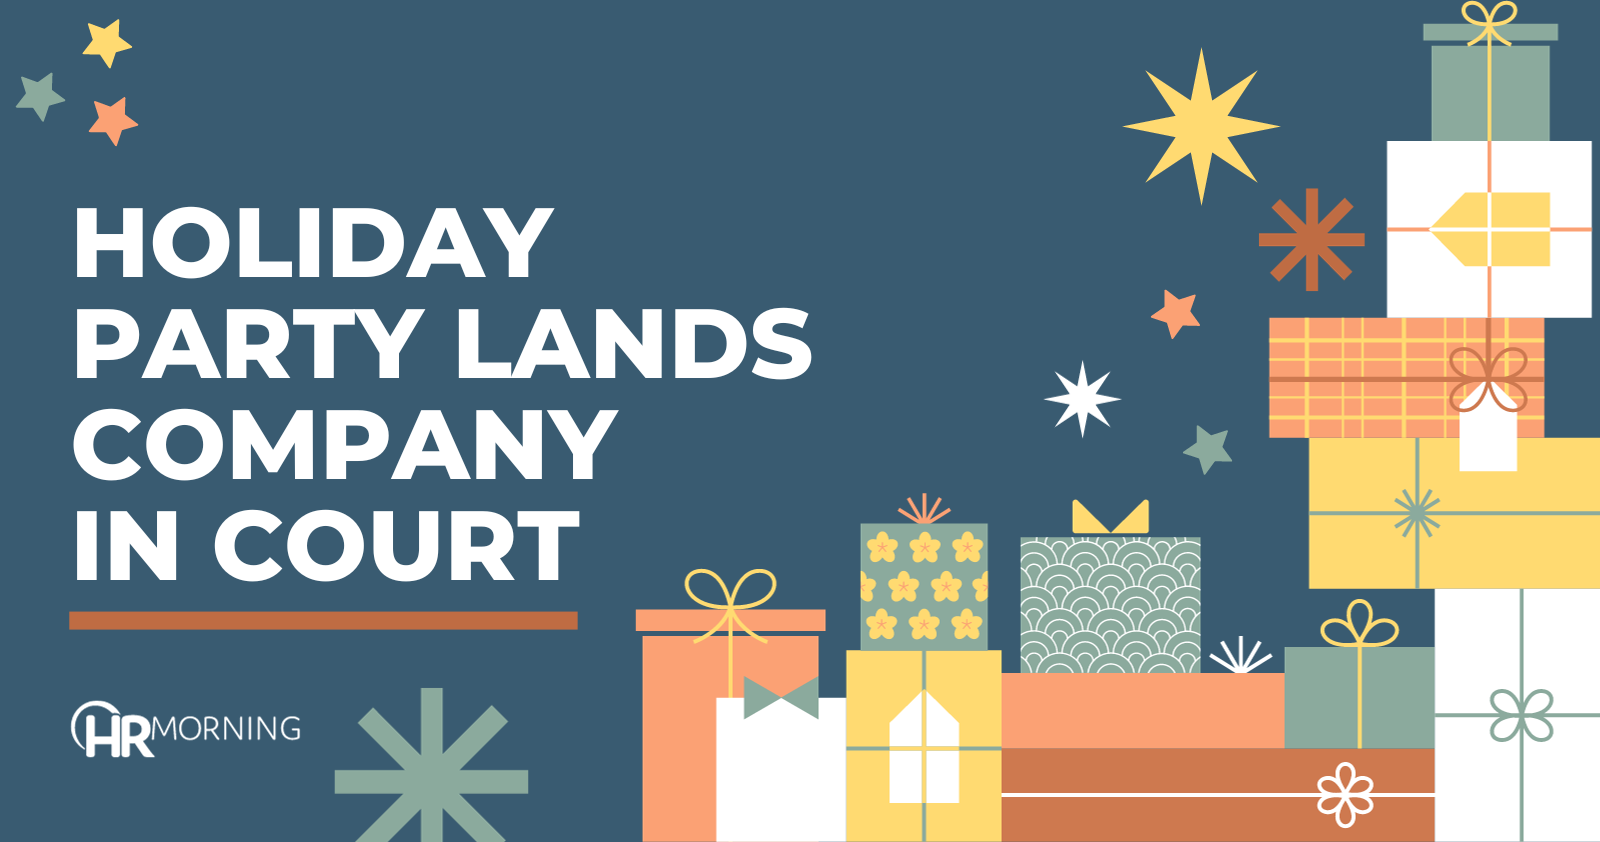 Holiday party lands company in court